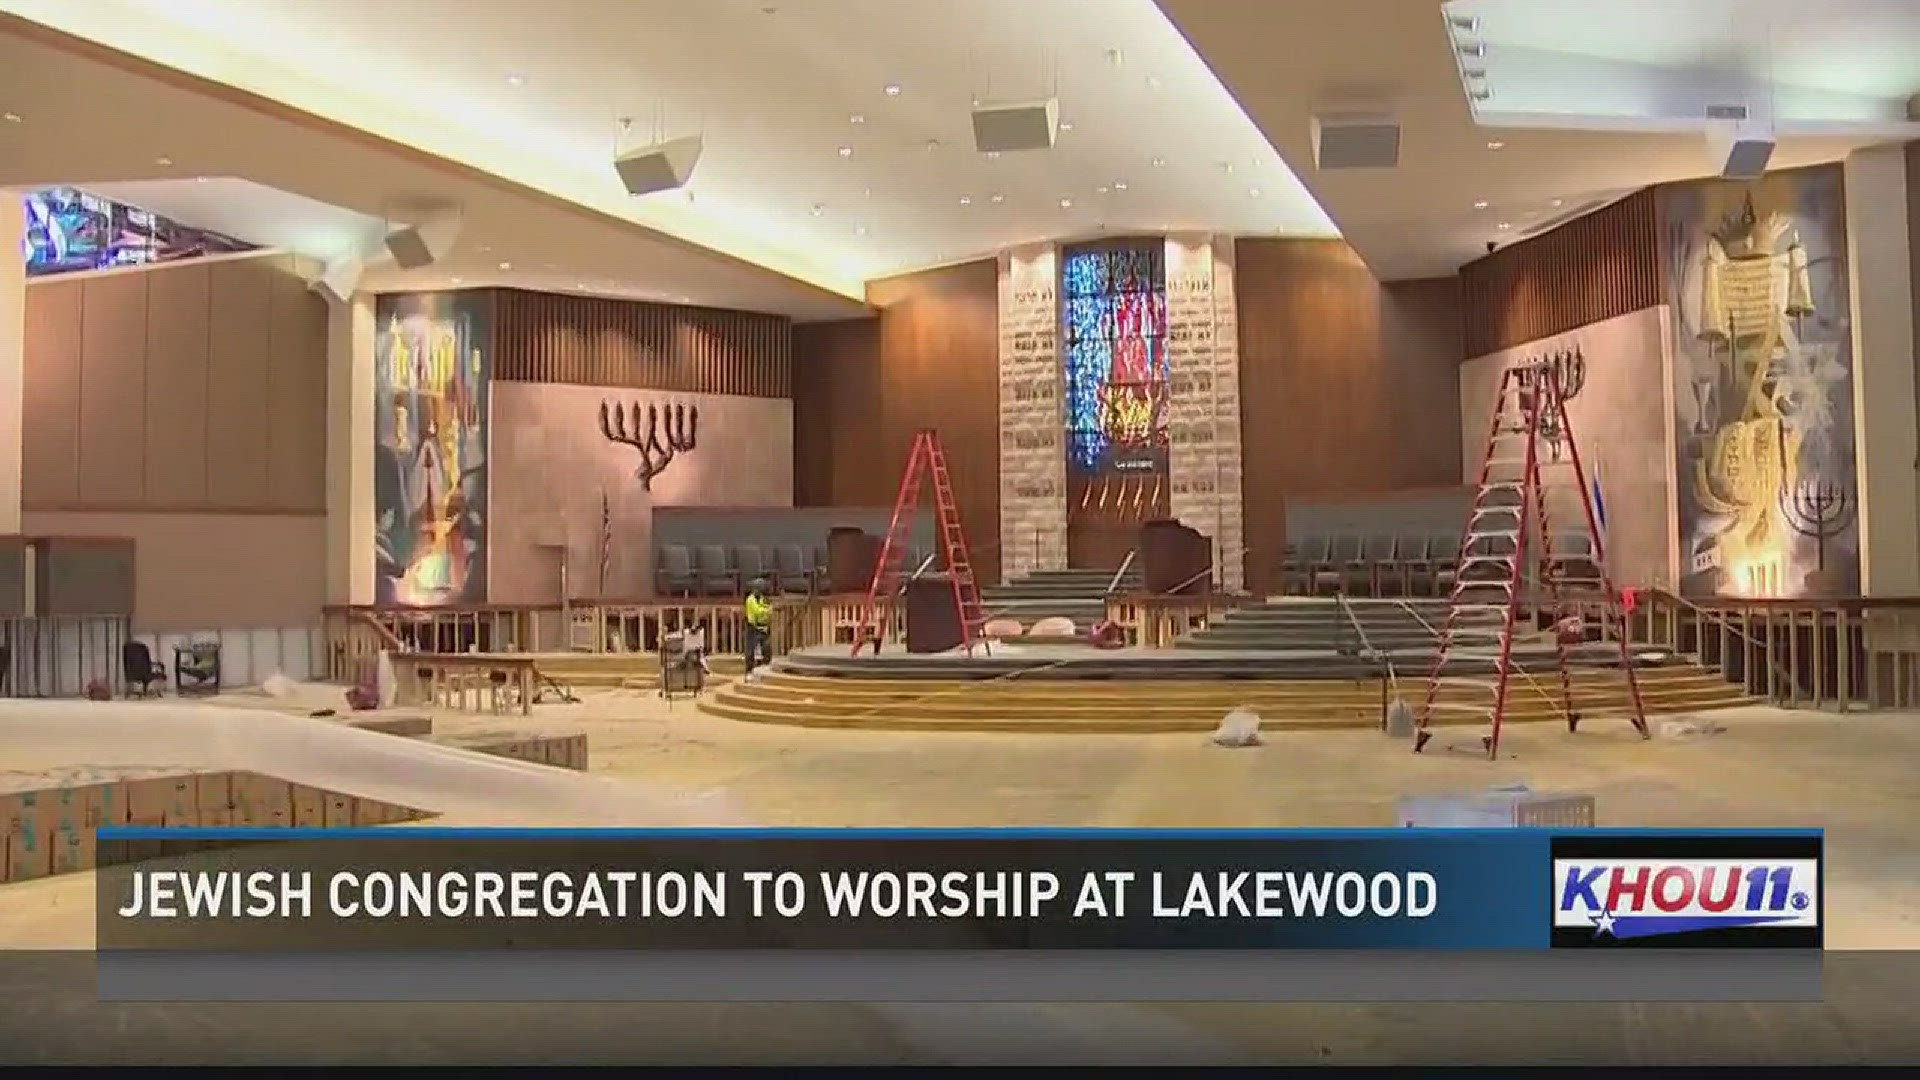 Lakewood Church has opened its doors to a local Jewish congregation after Harvey left more than a foot of water inside their temple, which is one of the largest in the country.